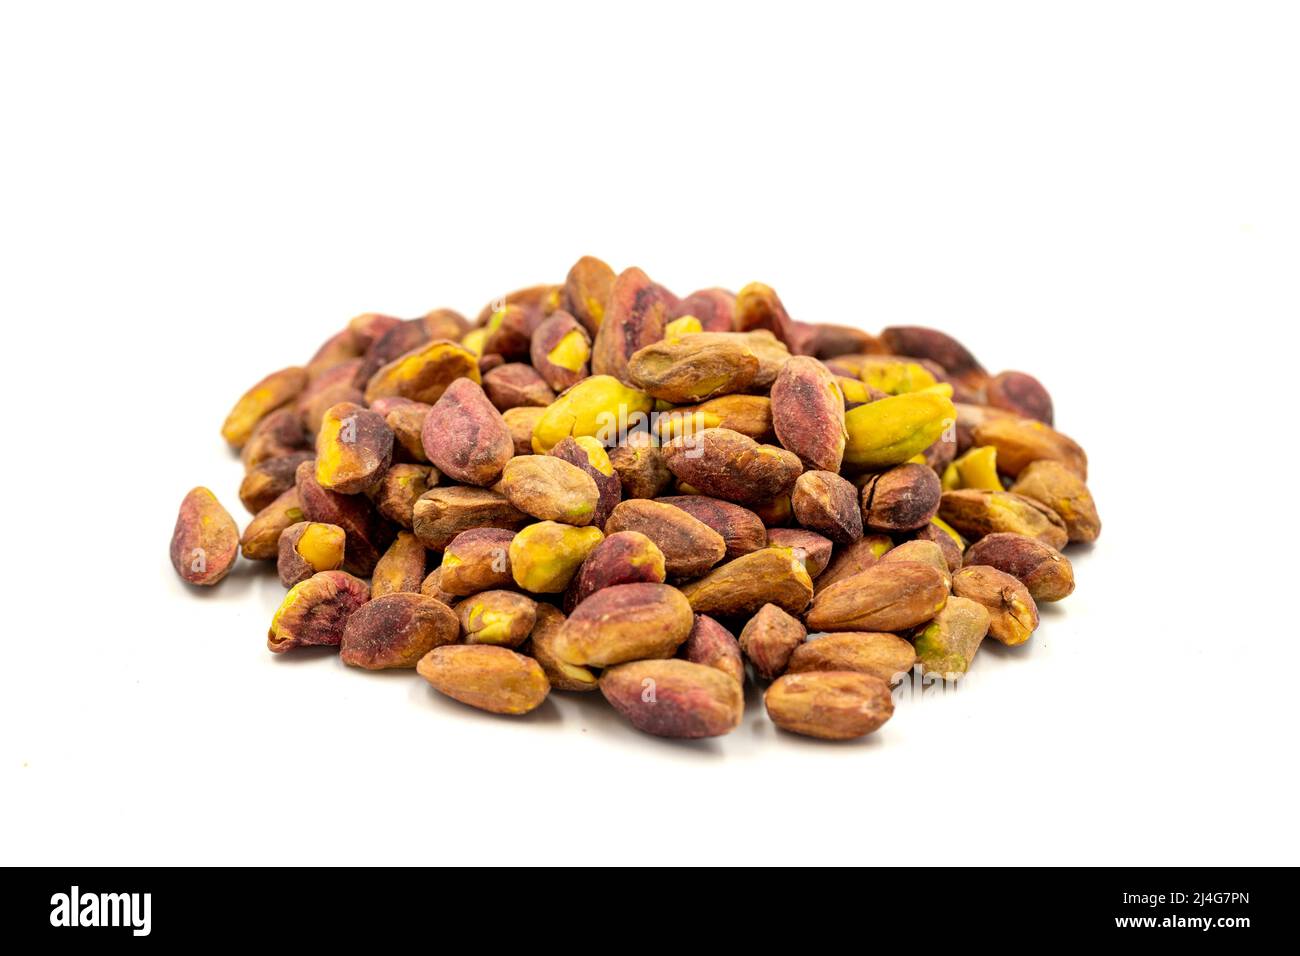 Premium Photo  Pistachio nuts in wooden bowl isolated on white background  top view